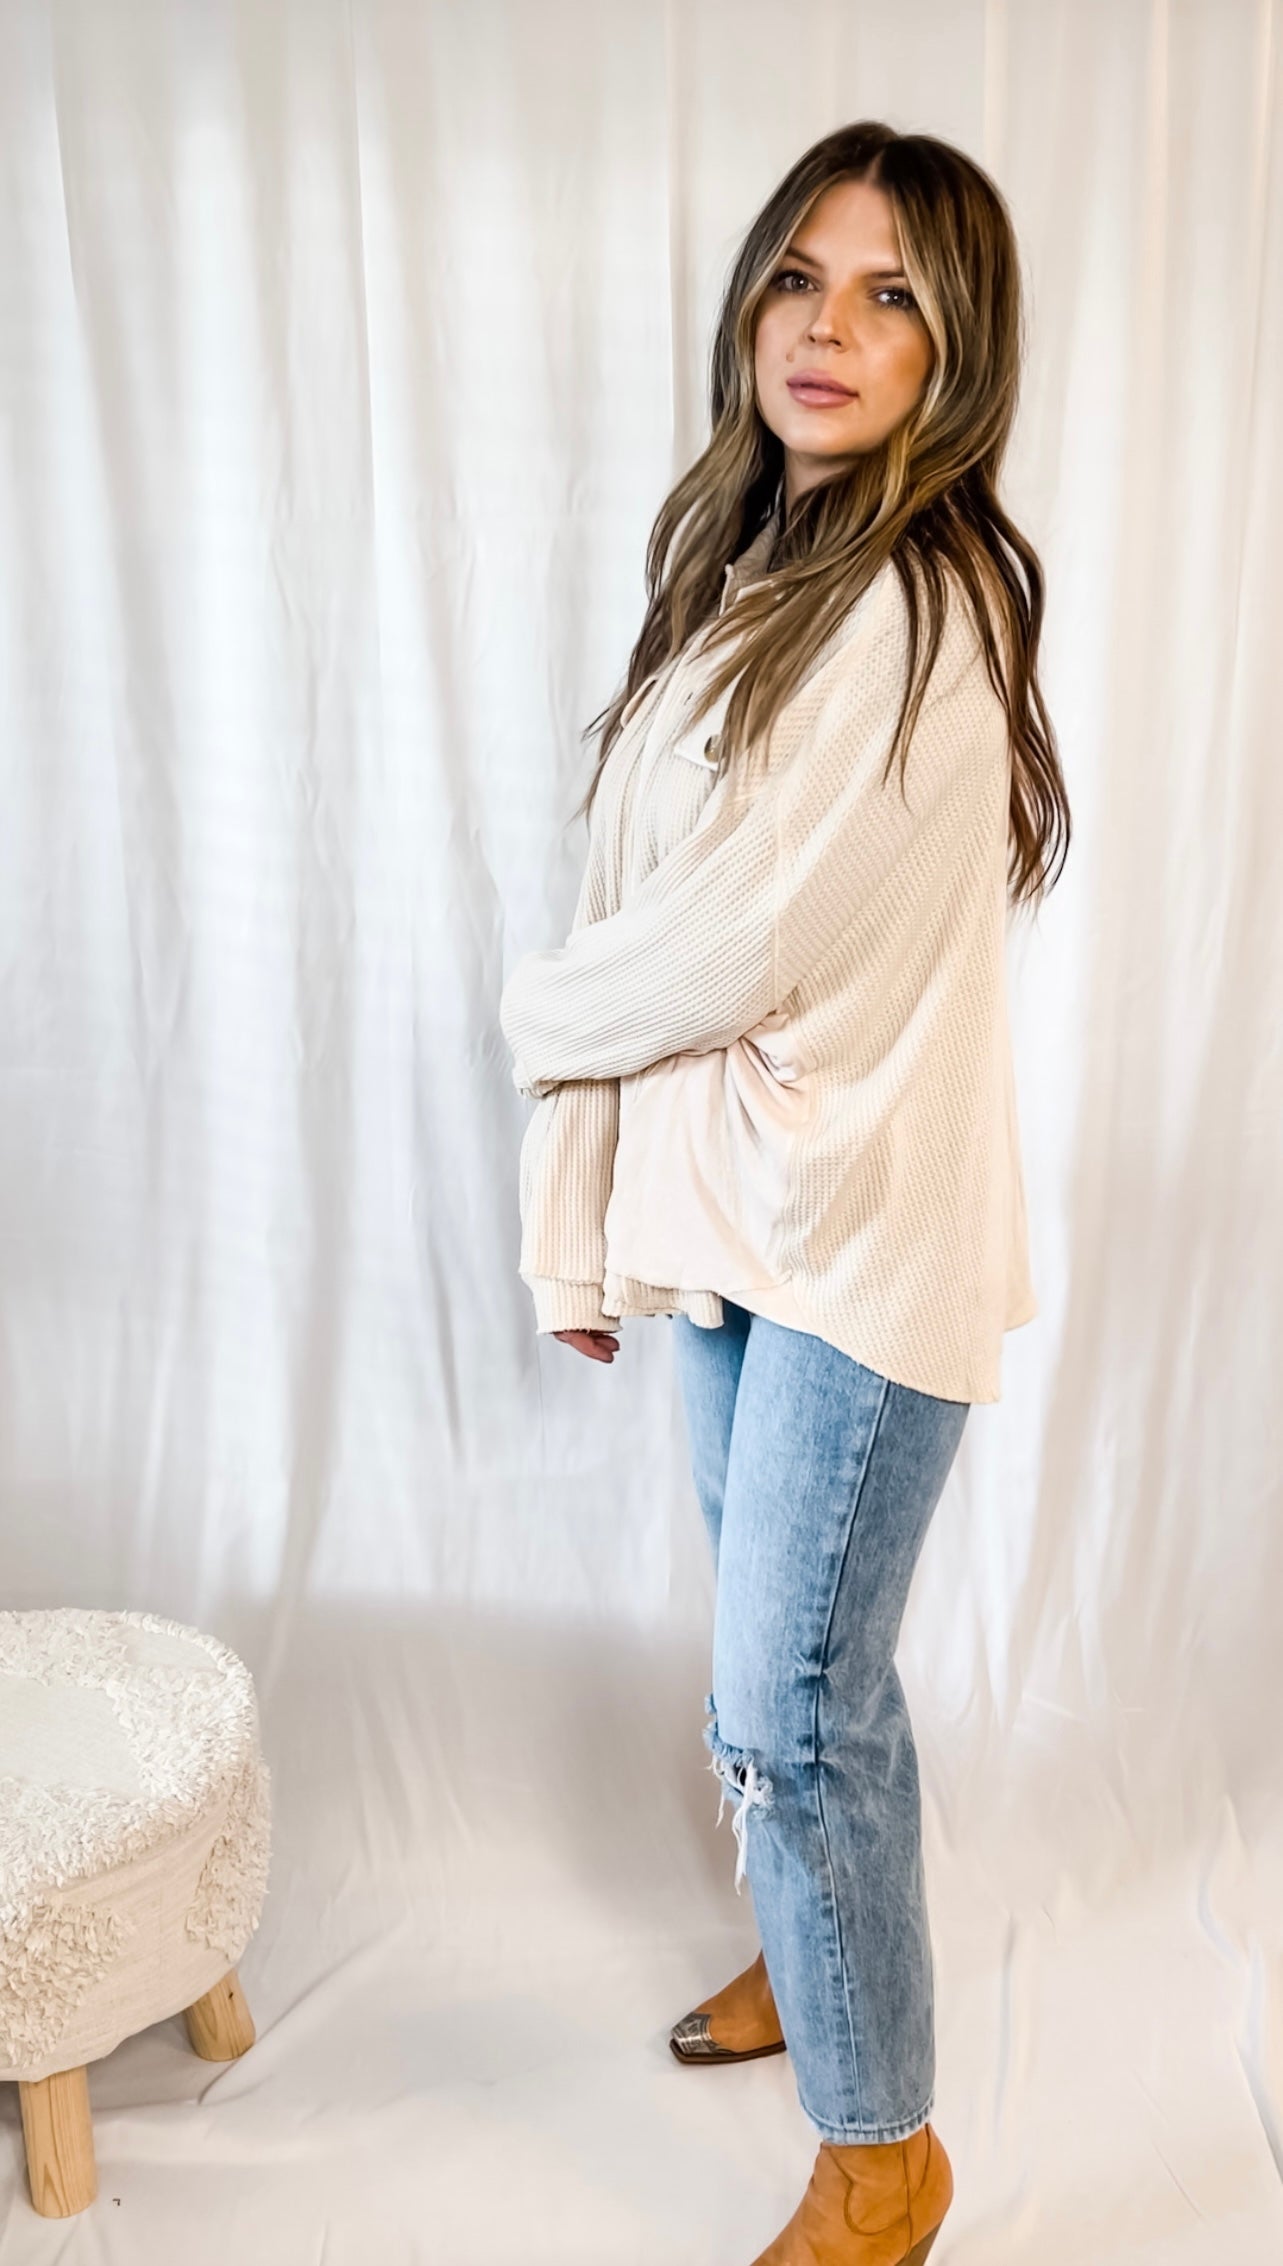 Evermore Slouchy Waffle Knit Top